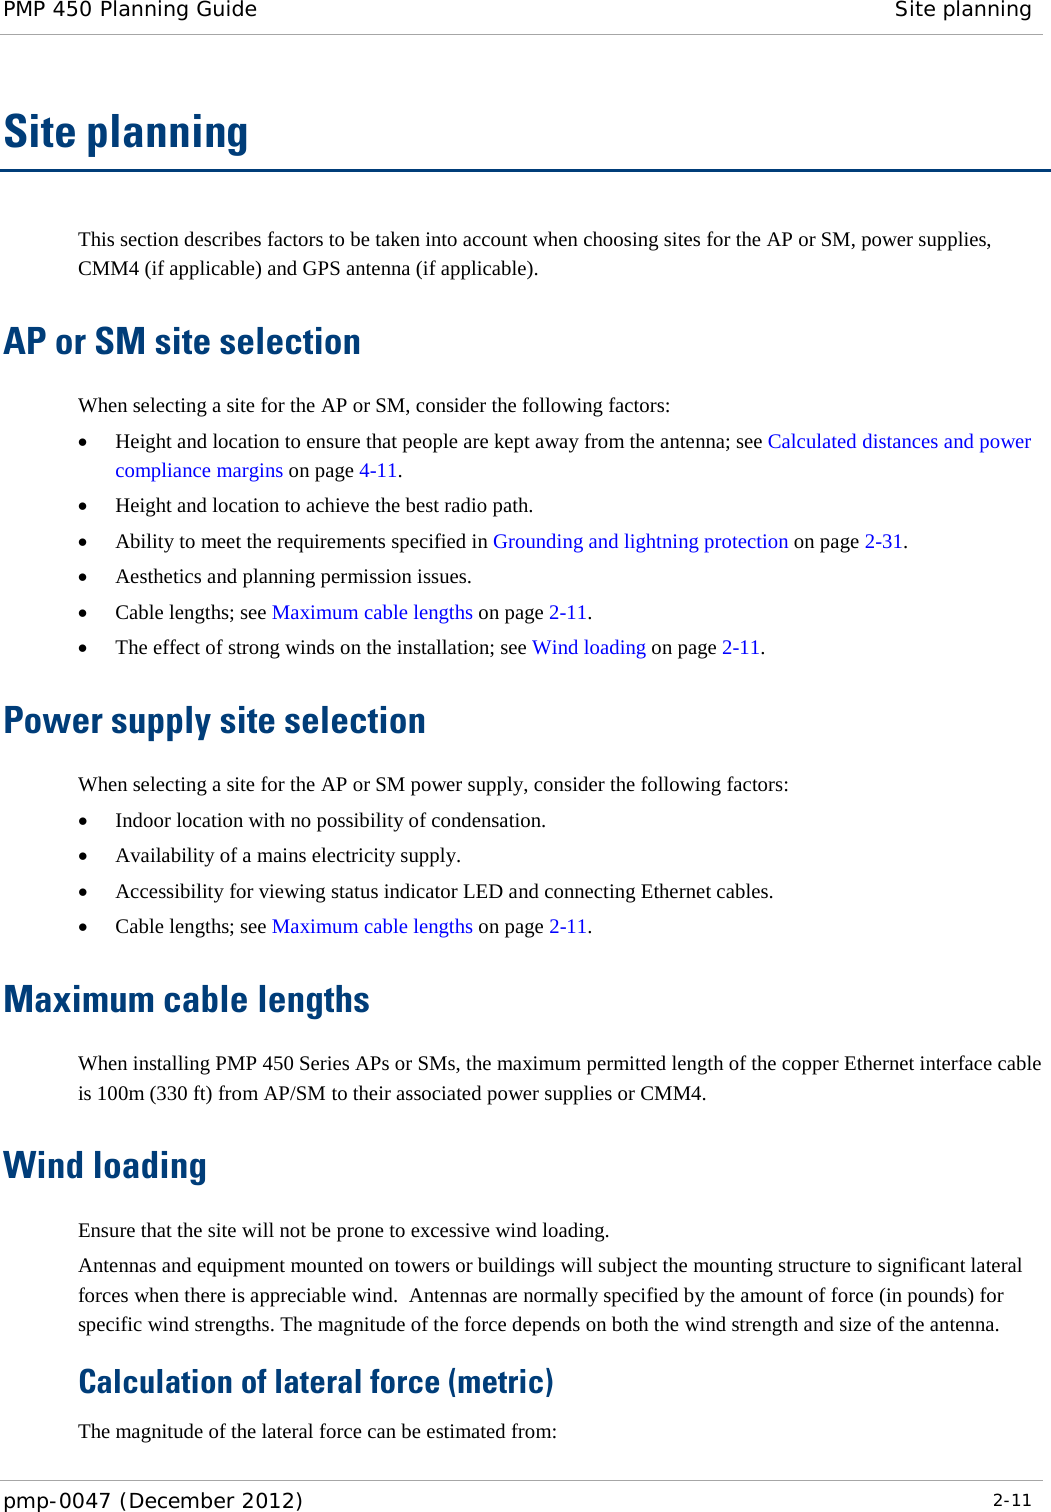 PMP 450 Planning Guide Site planning  pmp-0047 (December 2012)  2-11  Site planning This section describes factors to be taken into account when choosing sites for the AP or SM, power supplies, CMM4 (if applicable) and GPS antenna (if applicable). AP or SM site selection  When selecting a site for the AP or SM, consider the following factors: • Height and location to ensure that people are kept away from the antenna; see Calculated distances and power compliance margins on page 4-11. • Height and location to achieve the best radio path. • Ability to meet the requirements specified in Grounding and lightning protection on page 2-31. • Aesthetics and planning permission issues. • Cable lengths; see Maximum cable lengths on page 2-11. • The effect of strong winds on the installation; see Wind loading on page 2-11. Power supply site selection  When selecting a site for the AP or SM power supply, consider the following factors: • Indoor location with no possibility of condensation. • Availability of a mains electricity supply. • Accessibility for viewing status indicator LED and connecting Ethernet cables. • Cable lengths; see Maximum cable lengths on page 2-11. Maximum cable lengths When installing PMP 450 Series APs or SMs, the maximum permitted length of the copper Ethernet interface cable is 100m (330 ft) from AP/SM to their associated power supplies or CMM4. Wind loading Ensure that the site will not be prone to excessive wind loading. Antennas and equipment mounted on towers or buildings will subject the mounting structure to significant lateral forces when there is appreciable wind.  Antennas are normally specified by the amount of force (in pounds) for specific wind strengths. The magnitude of the force depends on both the wind strength and size of the antenna. Calculation of lateral force (metric) The magnitude of the lateral force can be estimated from: 